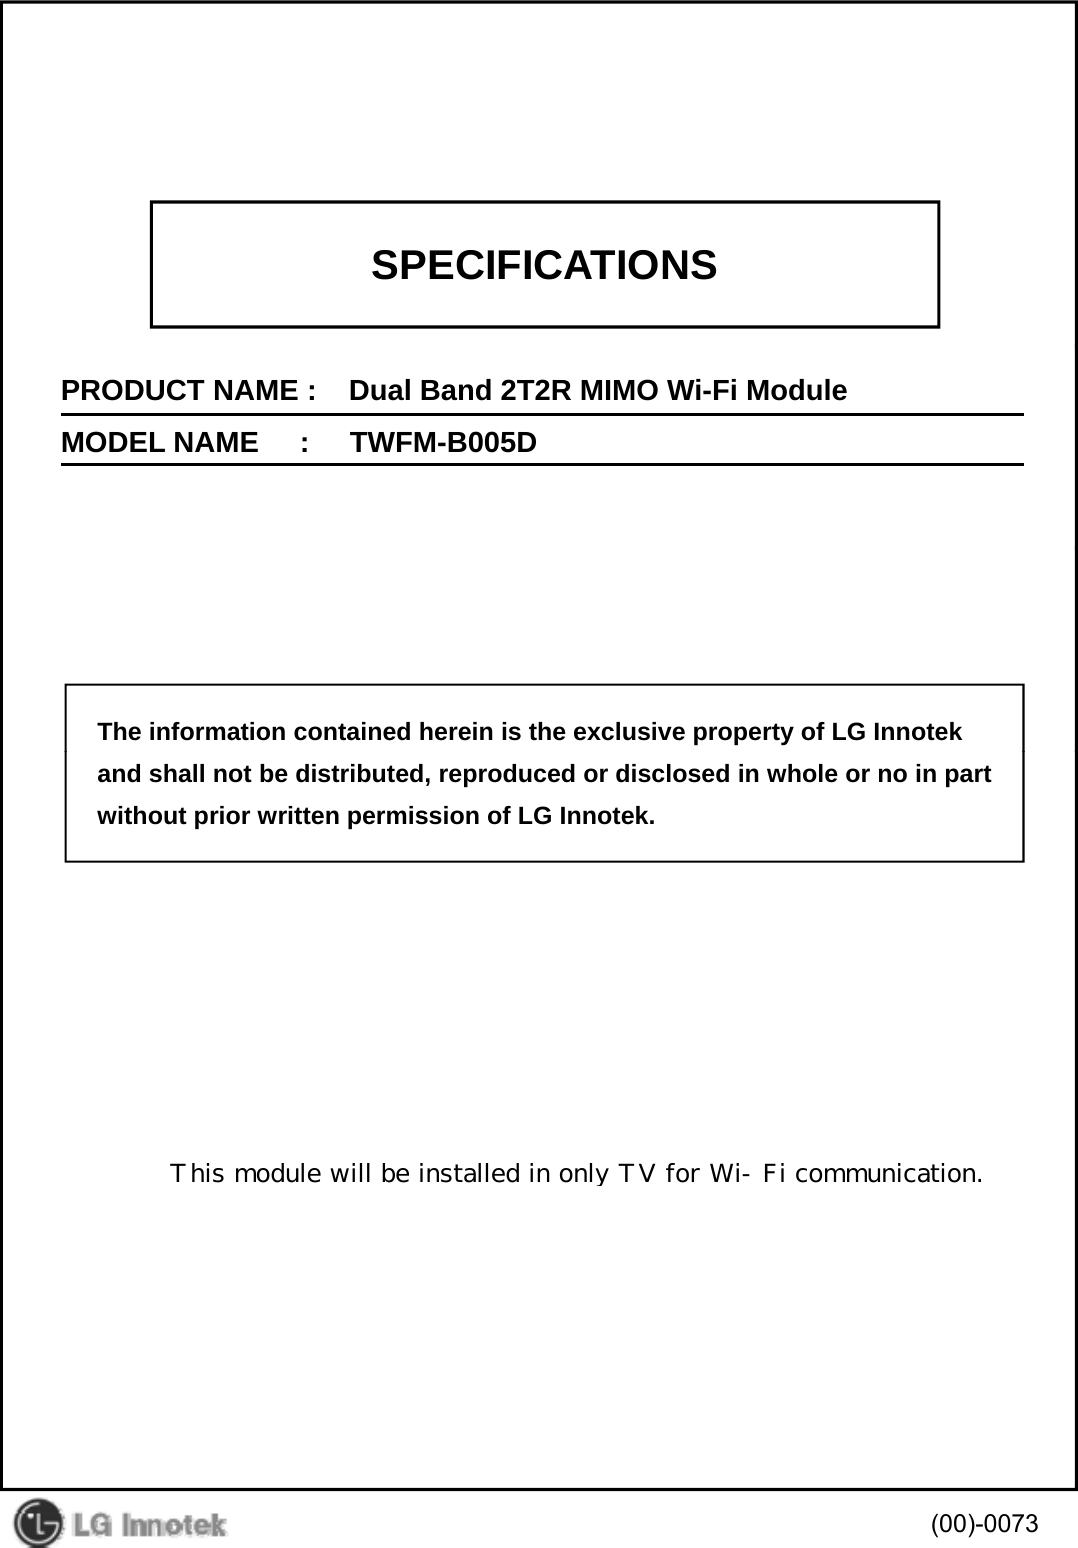 SPECIFICATIONSPRODUCT NAME :    Dual Band 2T2R MIMO Wi-Fi ModuleMODEL NAME     :     TWFM-B005DThe information contained herein is the exclusive property of LG Innotekand shall not be distributed, reproduced or disclosed in whole or no in partwithout prior written permission of LG Innotek.(00)-0073       This module will be installed in only TV for Wi-Fi communication.